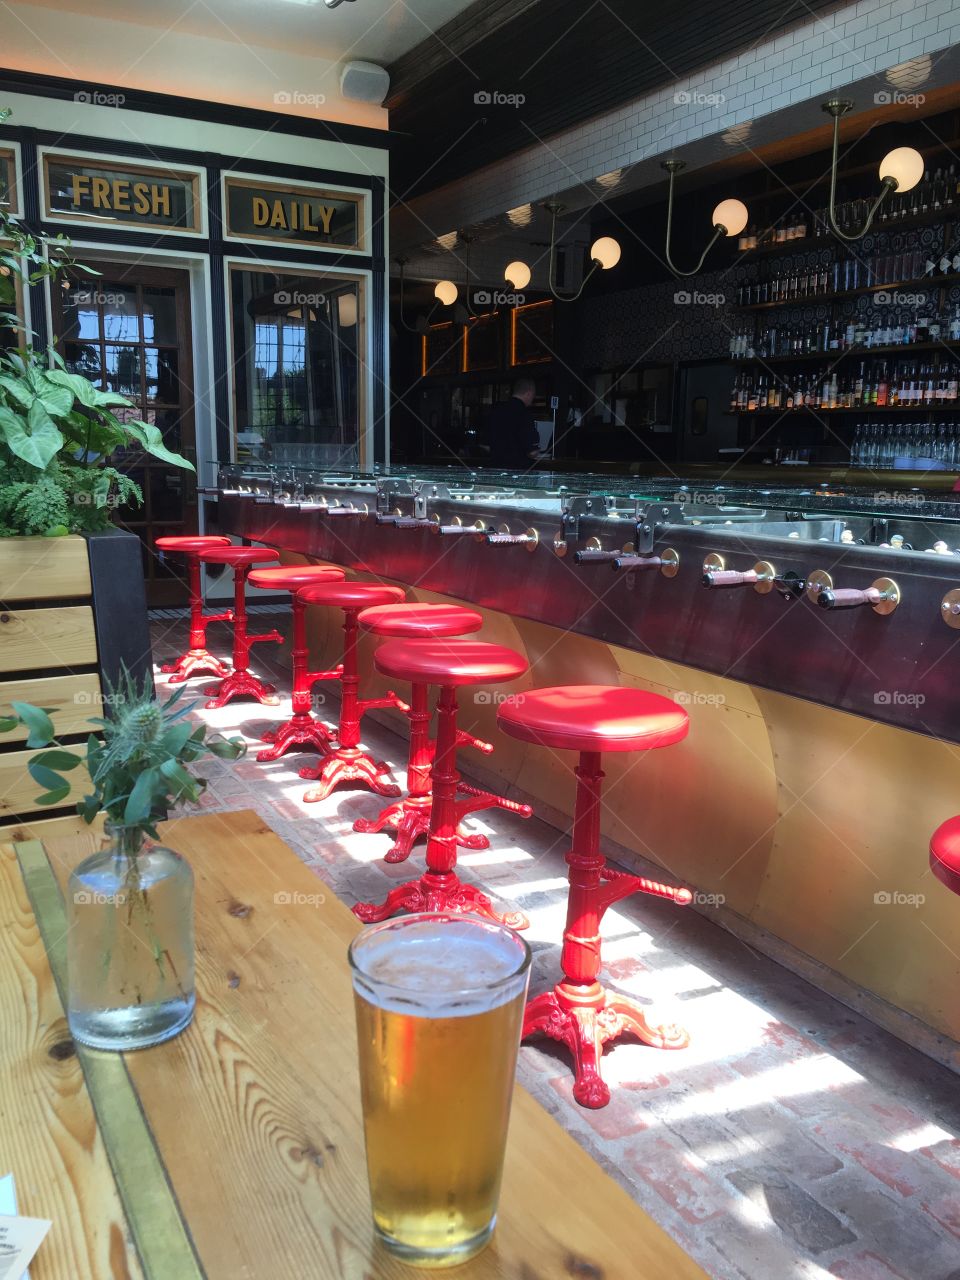 Beer, hops, bar and cast iron red chairs